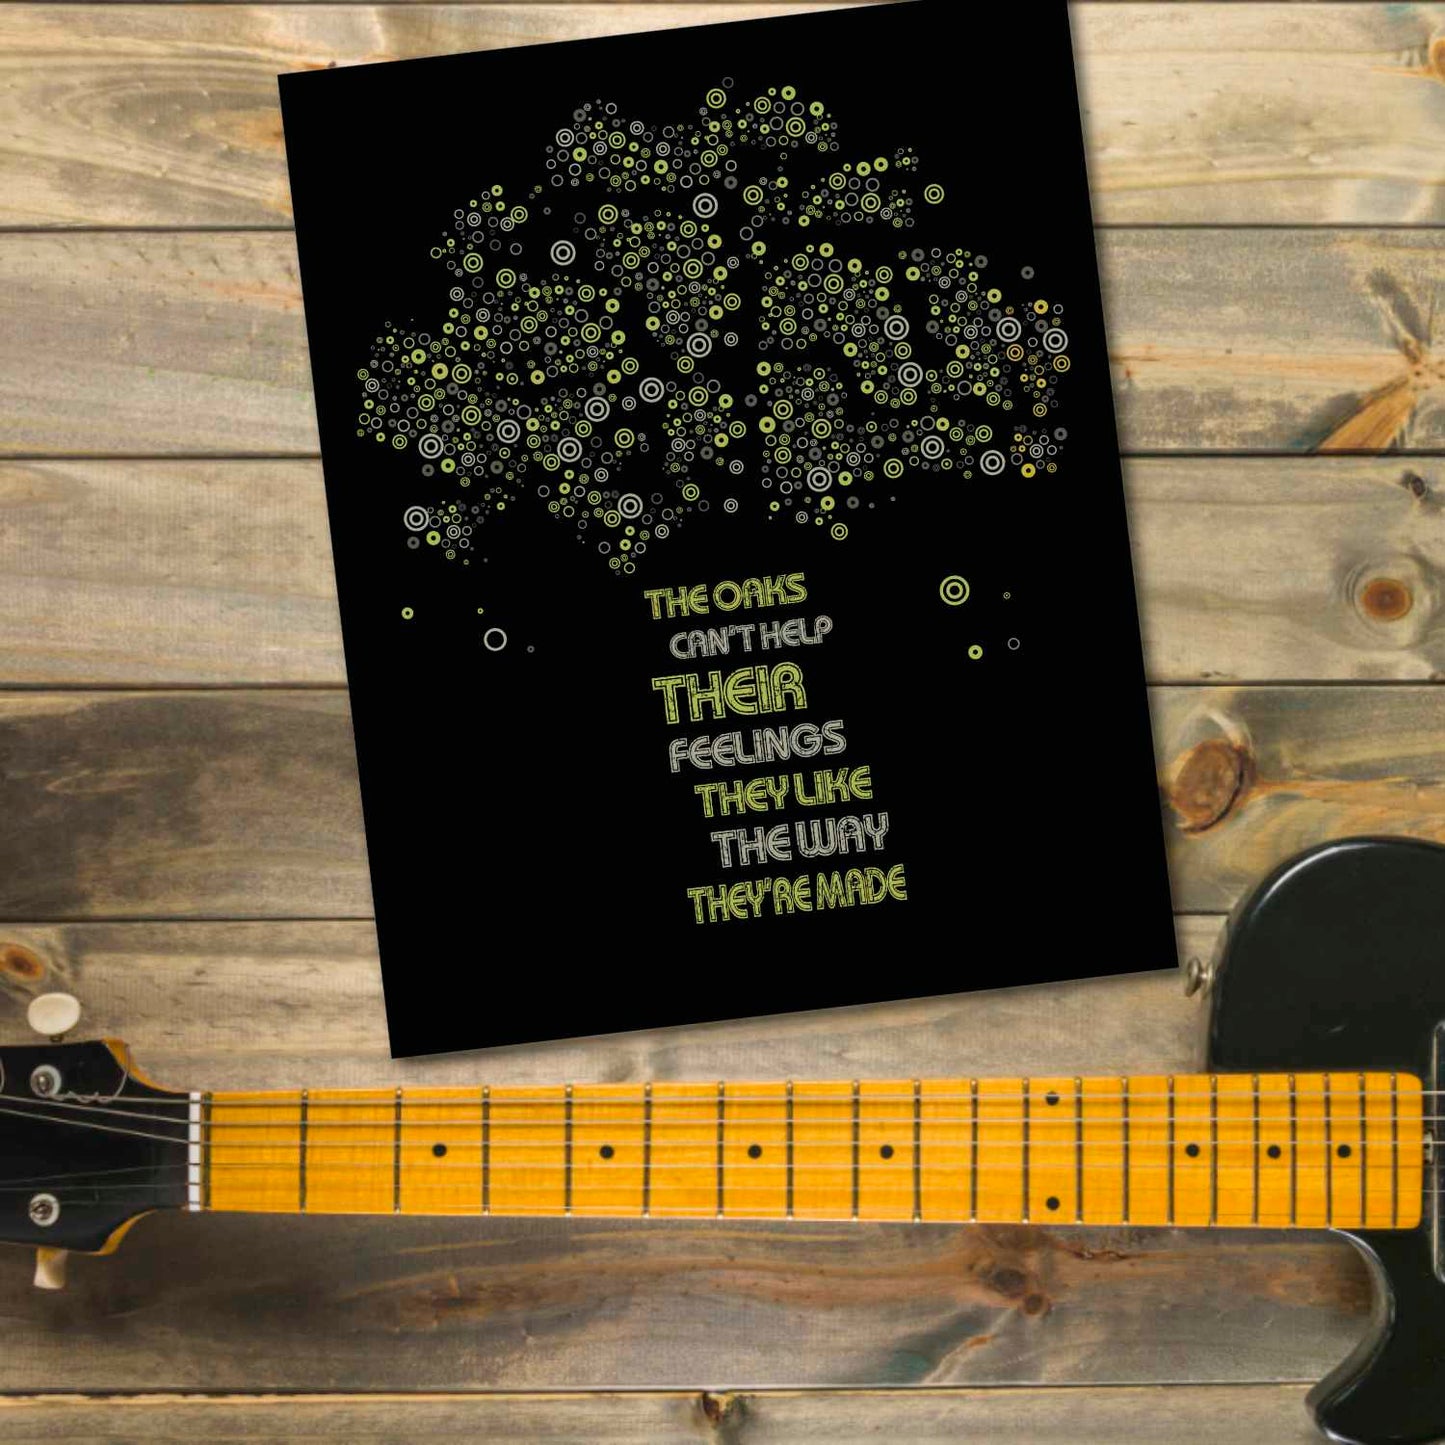 The Trees by Rush - Lyric Inspired Song Art Rock Music Print Song Lyrics Art Song Lyrics Art 8x10 Unframed Print 